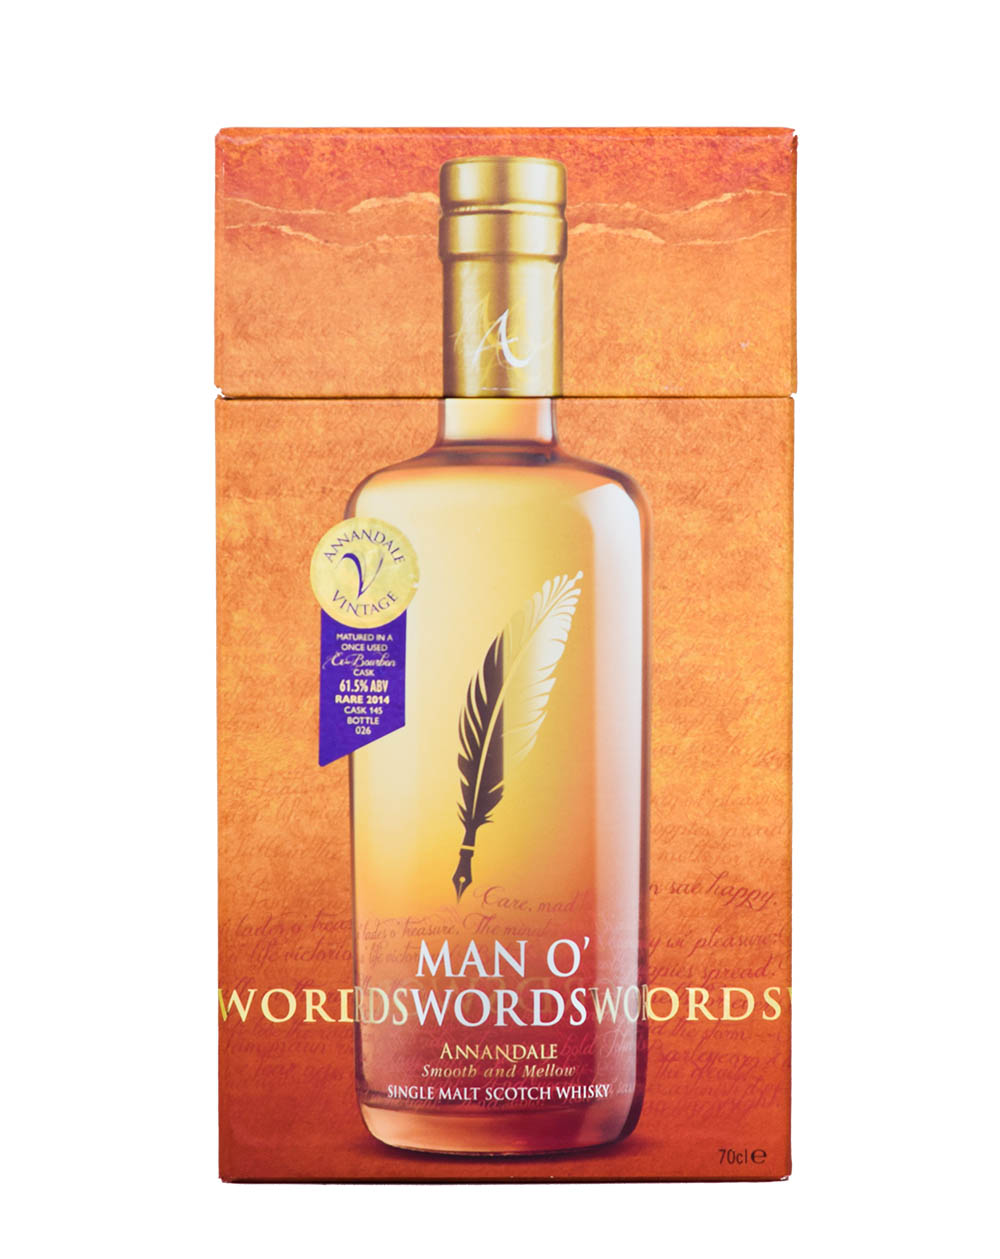 Annandale 2014 Man O'Word Box 2 Musthave Malts MHM